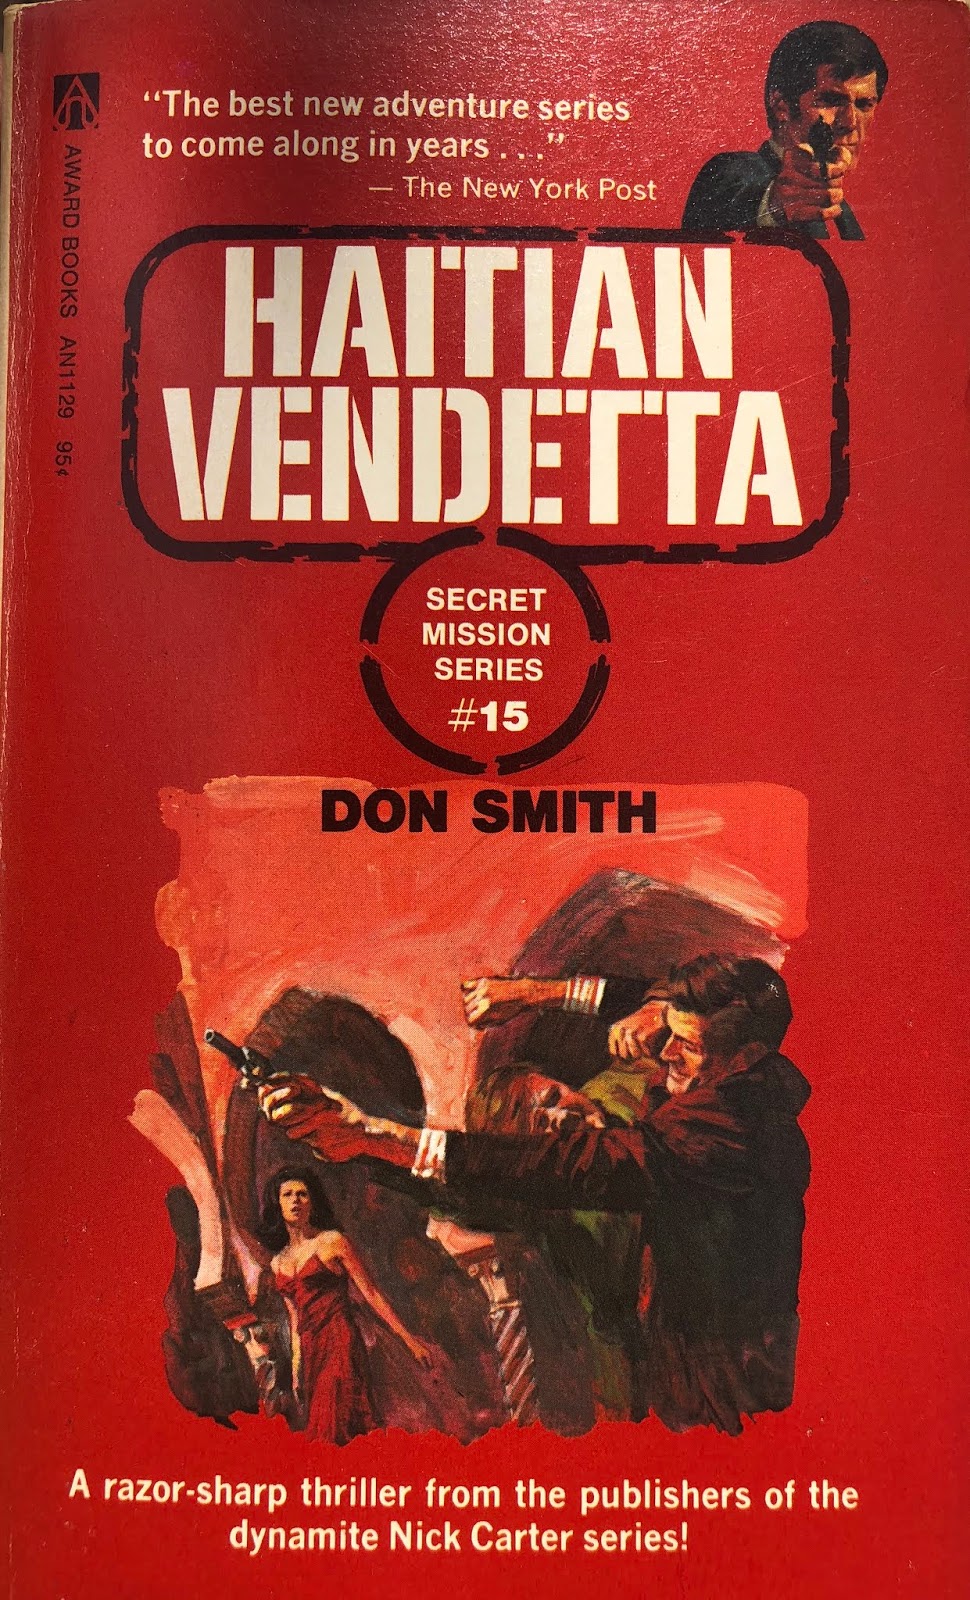 Don Smith’s "Secret Mission" paperback series spanned the decade ...